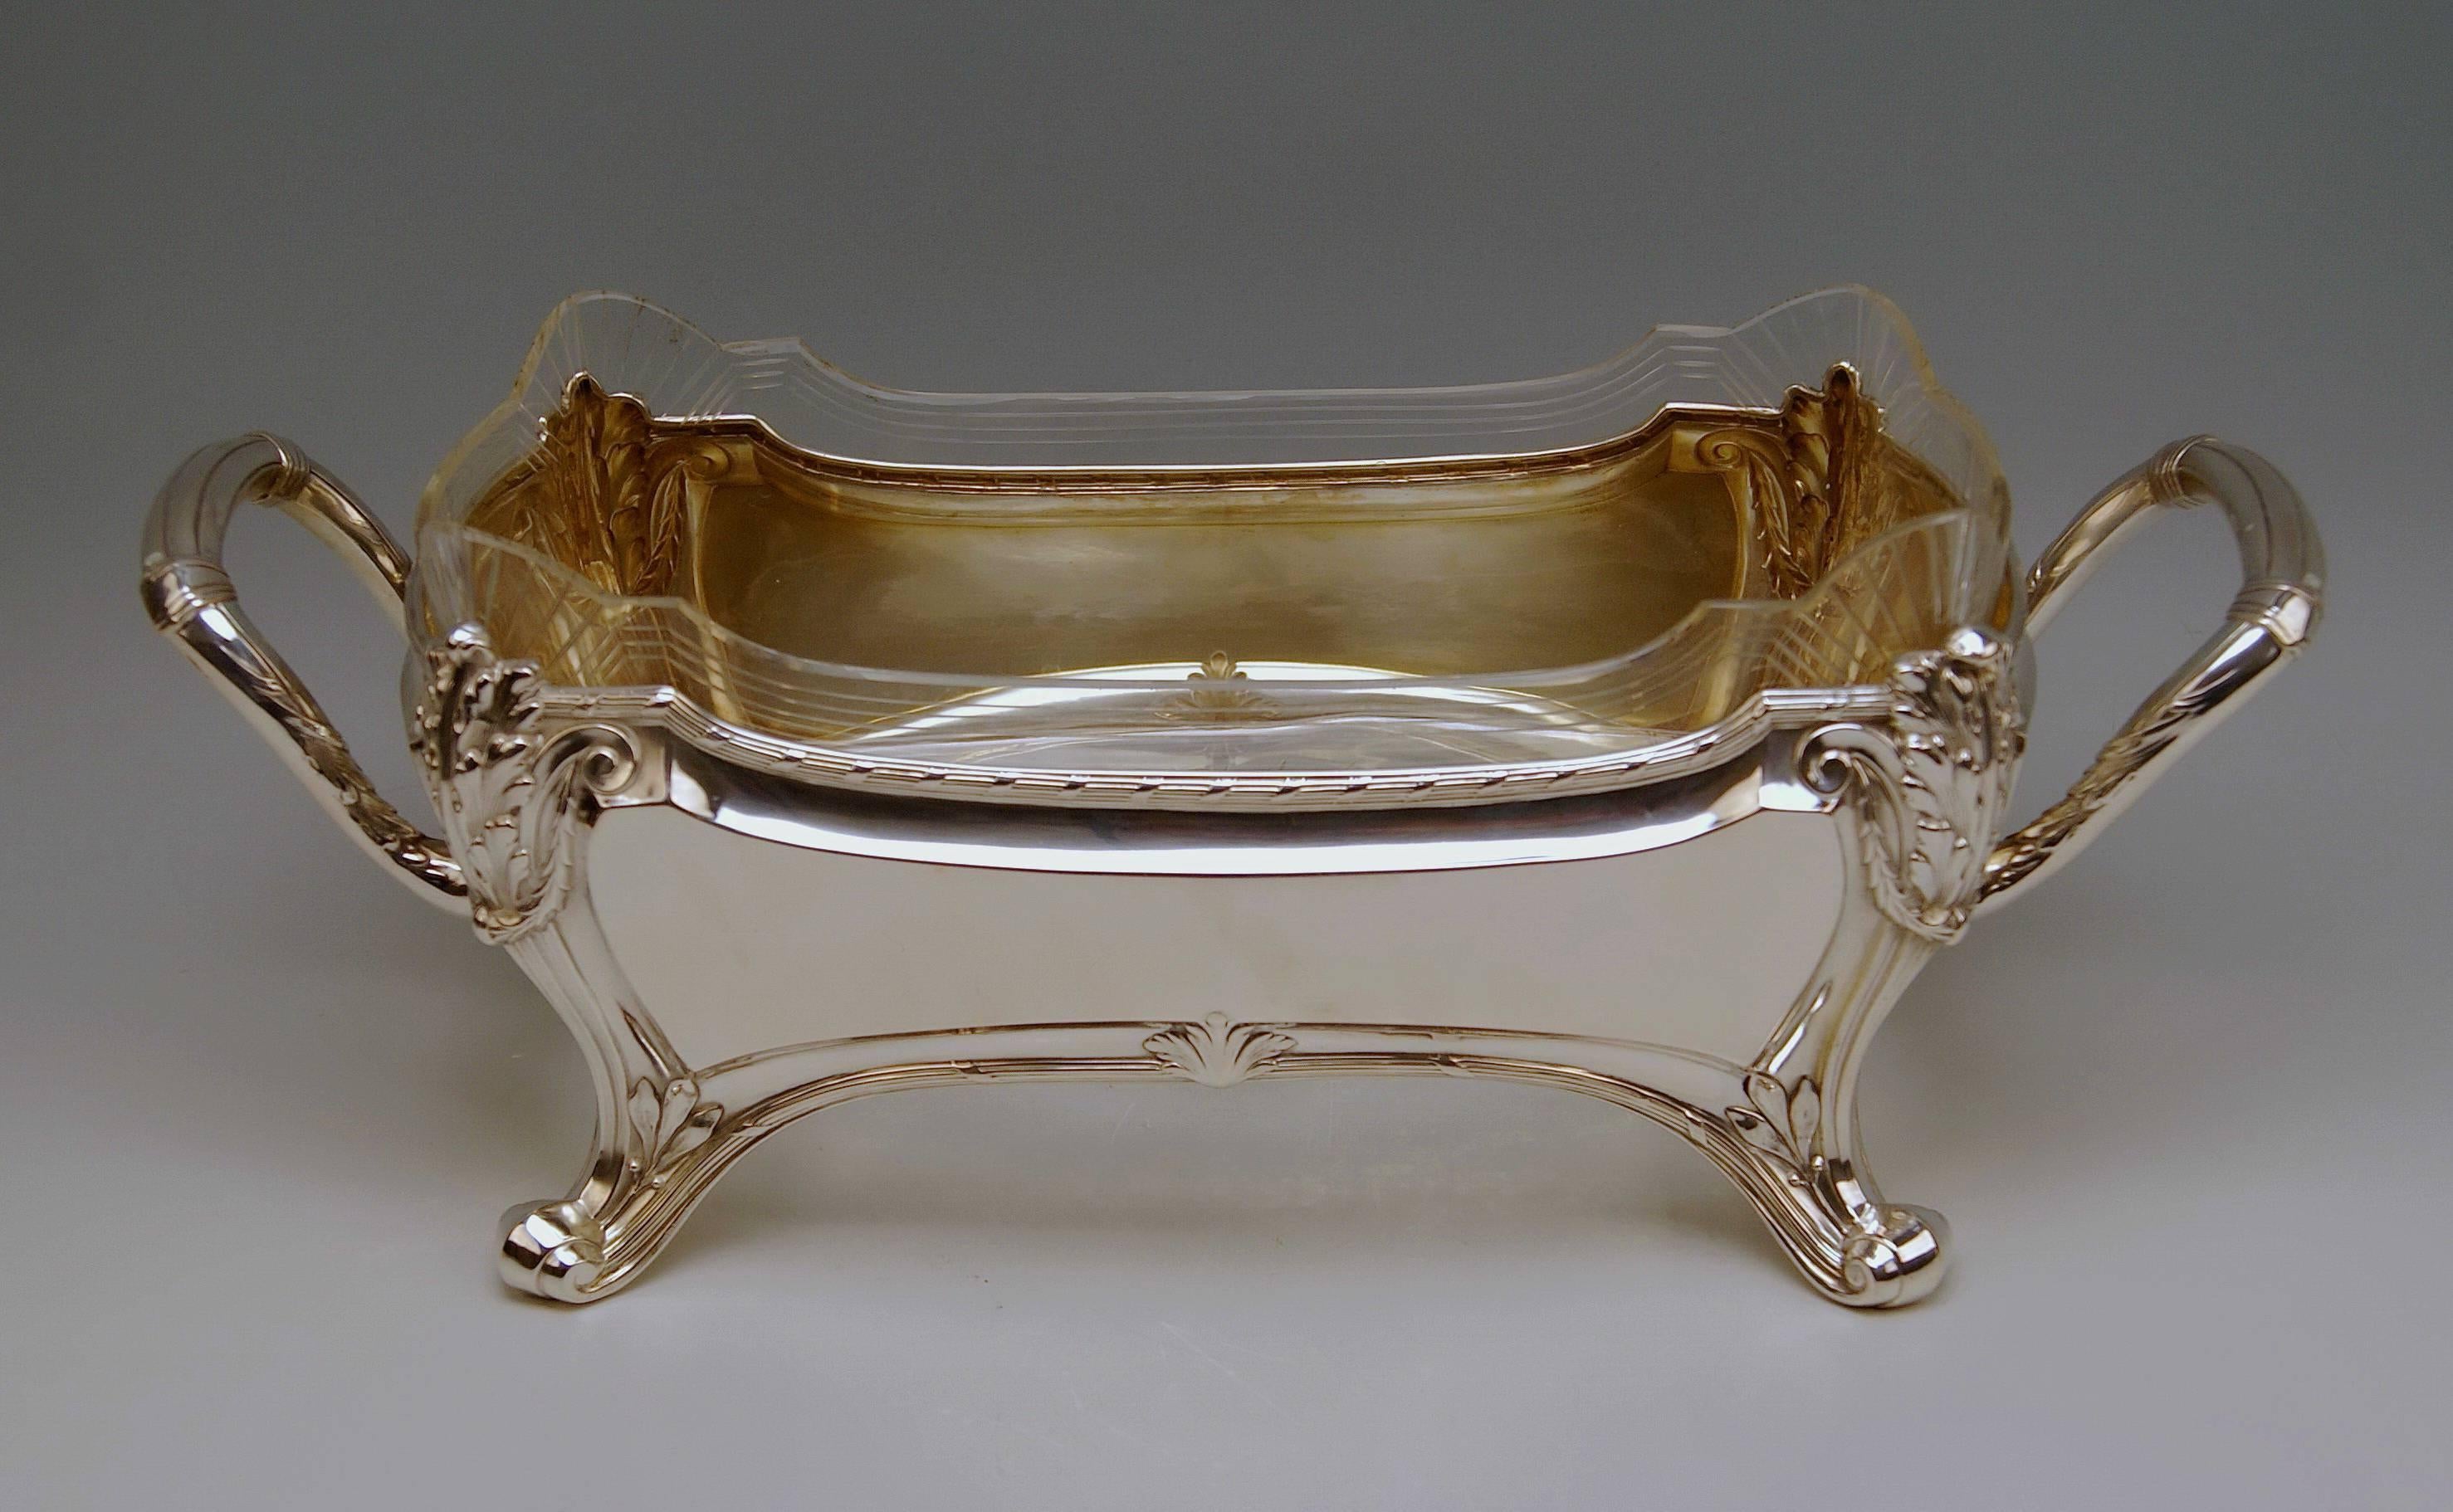 Stunning centrepiece / Fruit bowl Art Nouveau, made circa 1900.

Manufactory:
Otto Wolter / Schwaebisch Gmuend, Germany (= mark of manufactory impressed)

German Official Silver 800 Mark existing, too: Crescent with